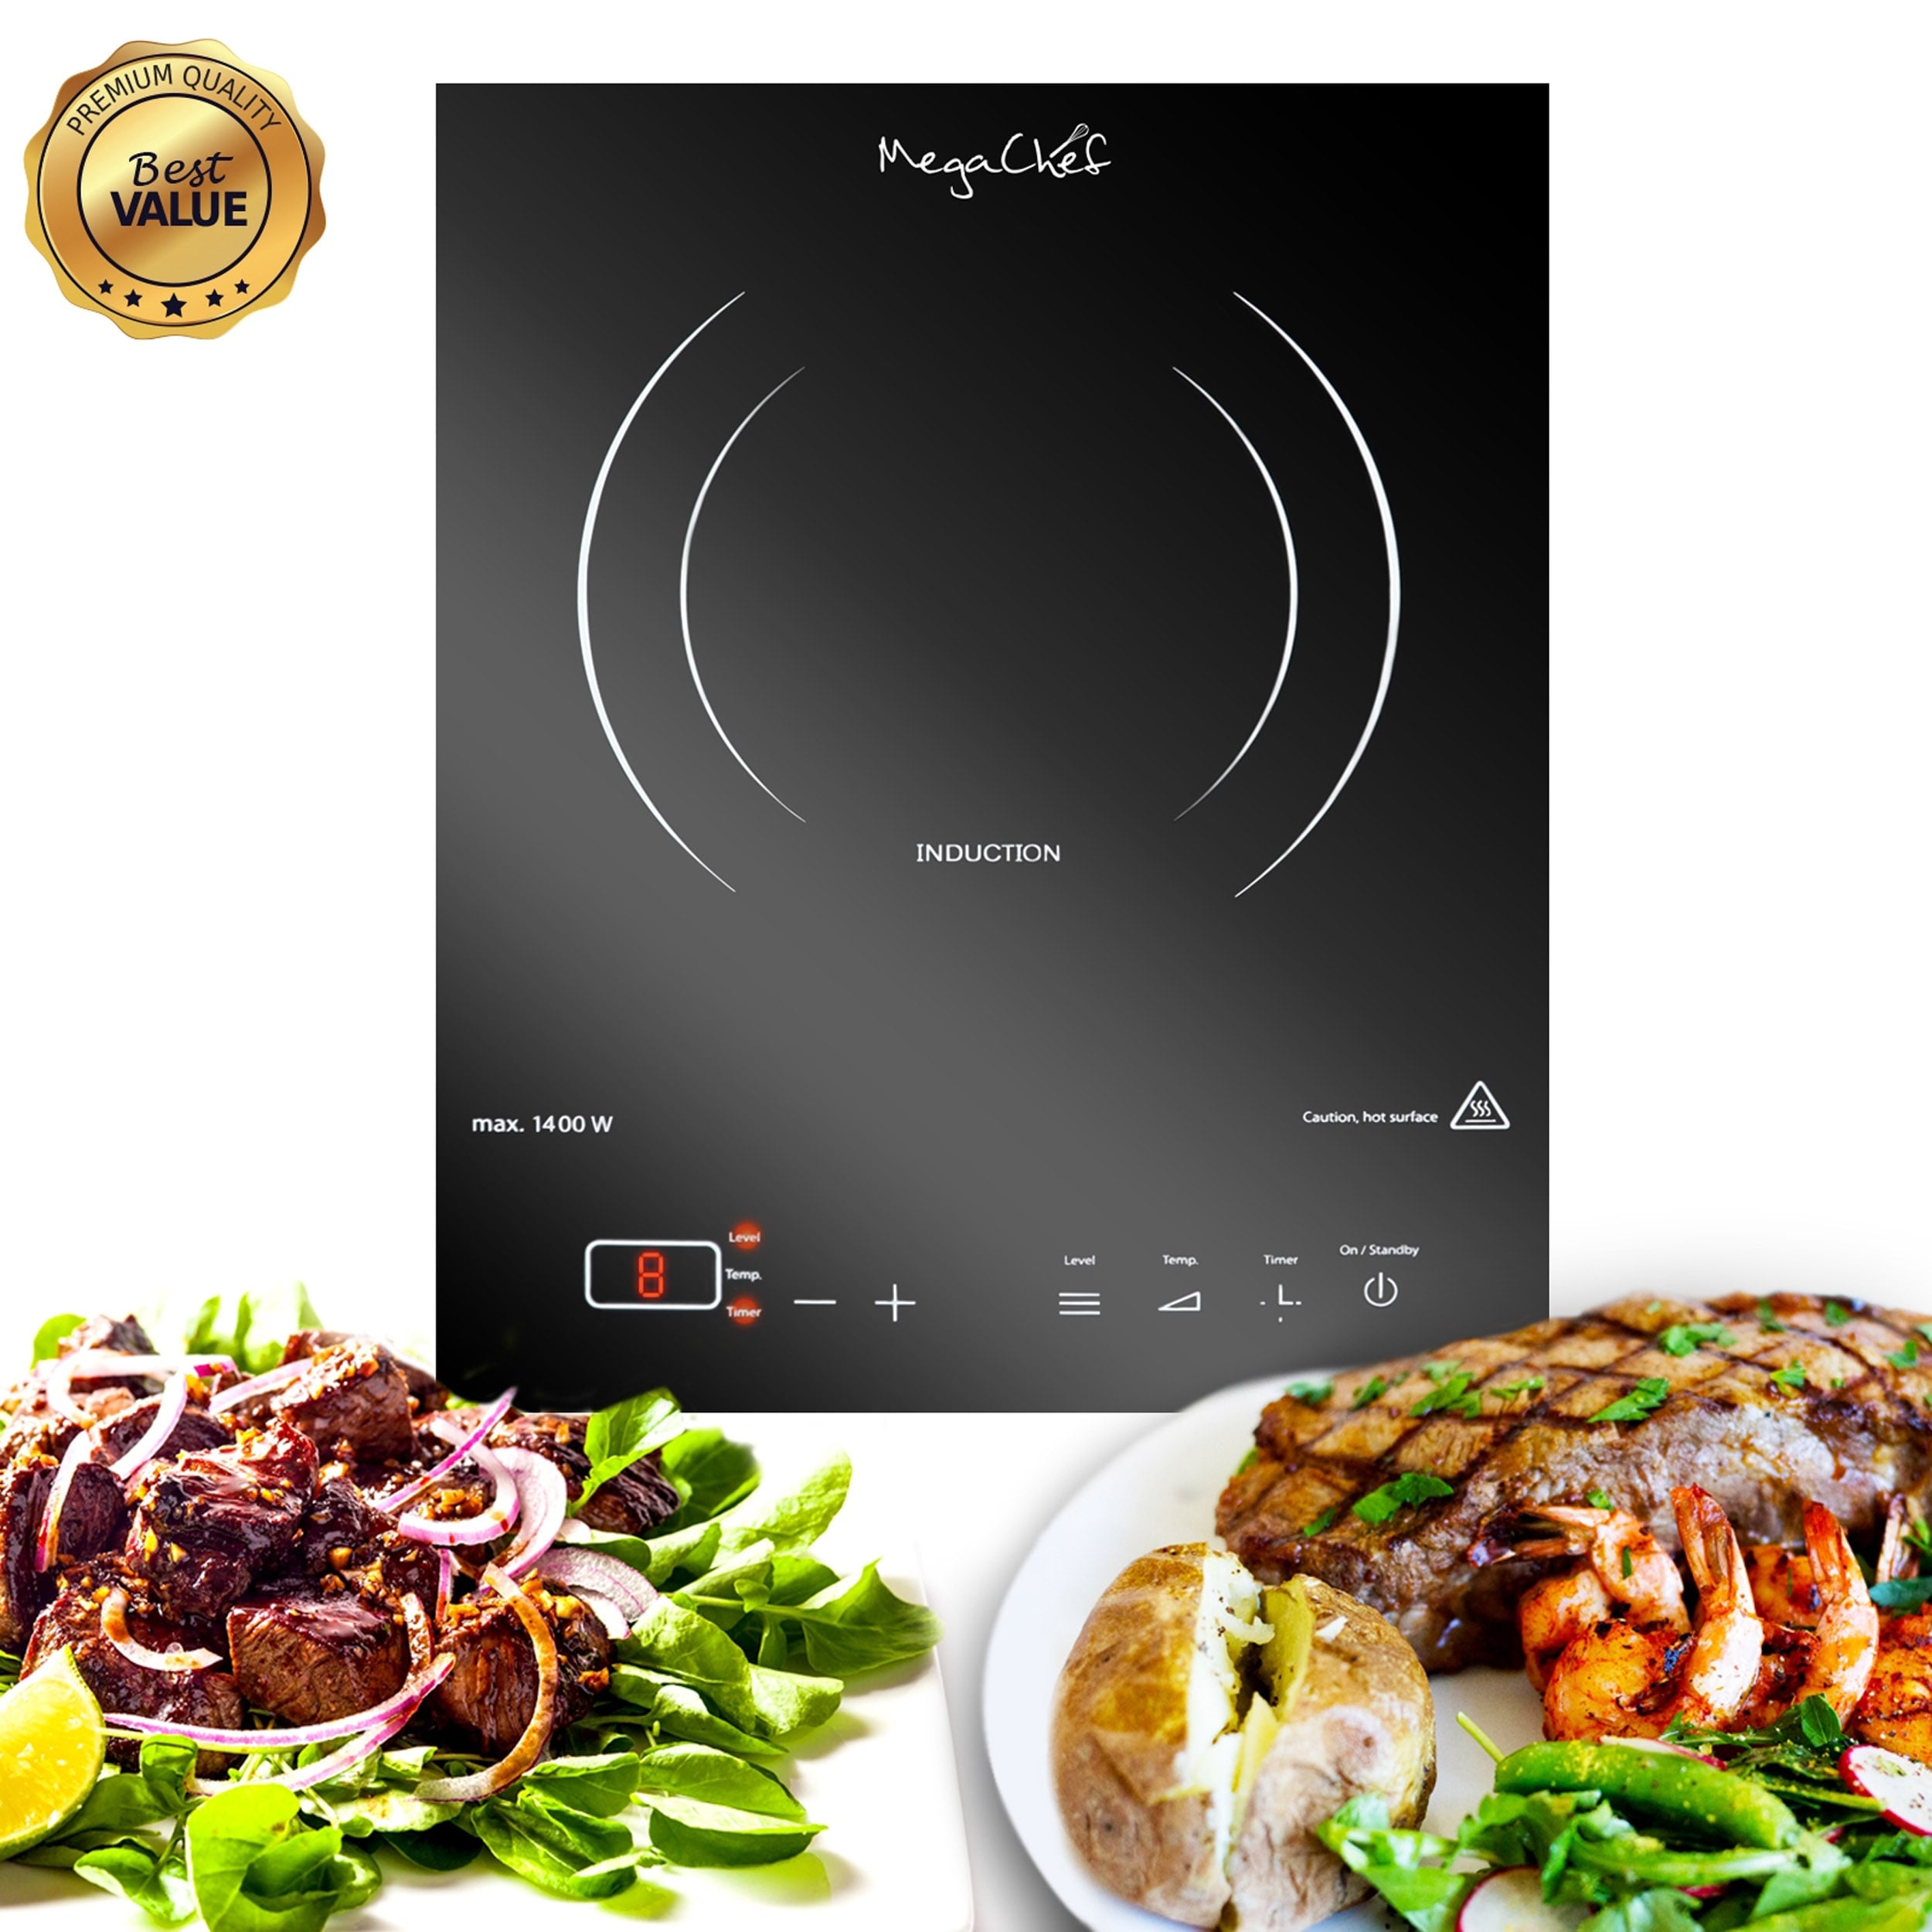 https://ak1.ostkcdn.com/images/products/is/images/direct/0b7c5179004a1a75a59bb1799f70903e3d6d8d3a/MegaChef-Portable-Induction-Cooktop-Burner-with-Digital-Control-Panel.jpg